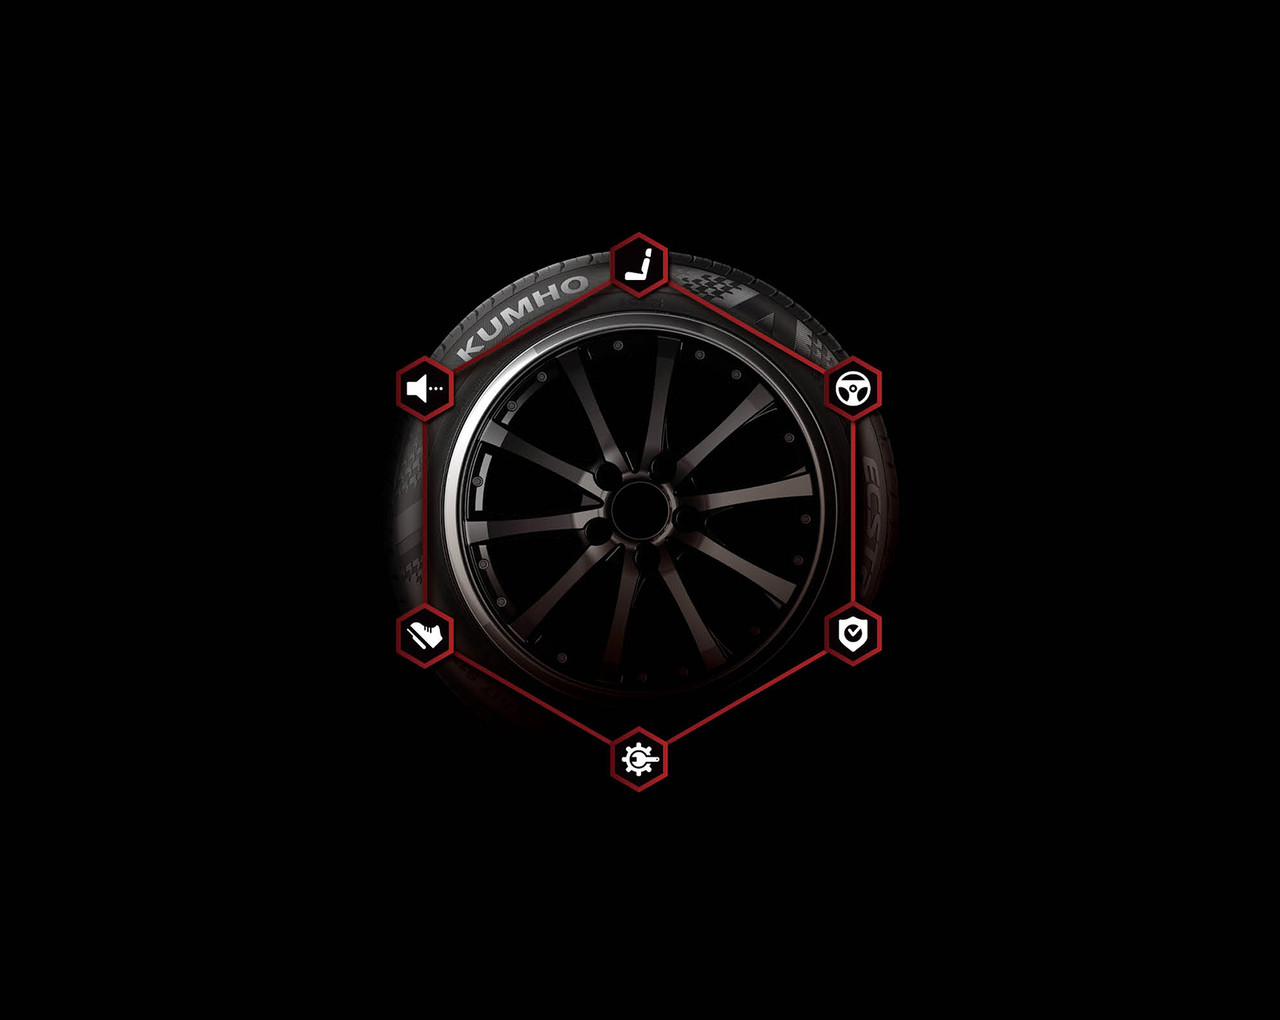 <p style="text-align: left; line-height: 1.15;"> 	<br> </p>  <p style="text-align: left; line-height: 1.15;">KUMHO TIRE Global Key Visual<span style="font-size: 15px;"><br></span><span style="font-size: 12px;">Partnership Project / Key Visual / Graphic Motif</span></p>  <p style="text-align: left; line-height: 1.15;"> 	<br> </p>